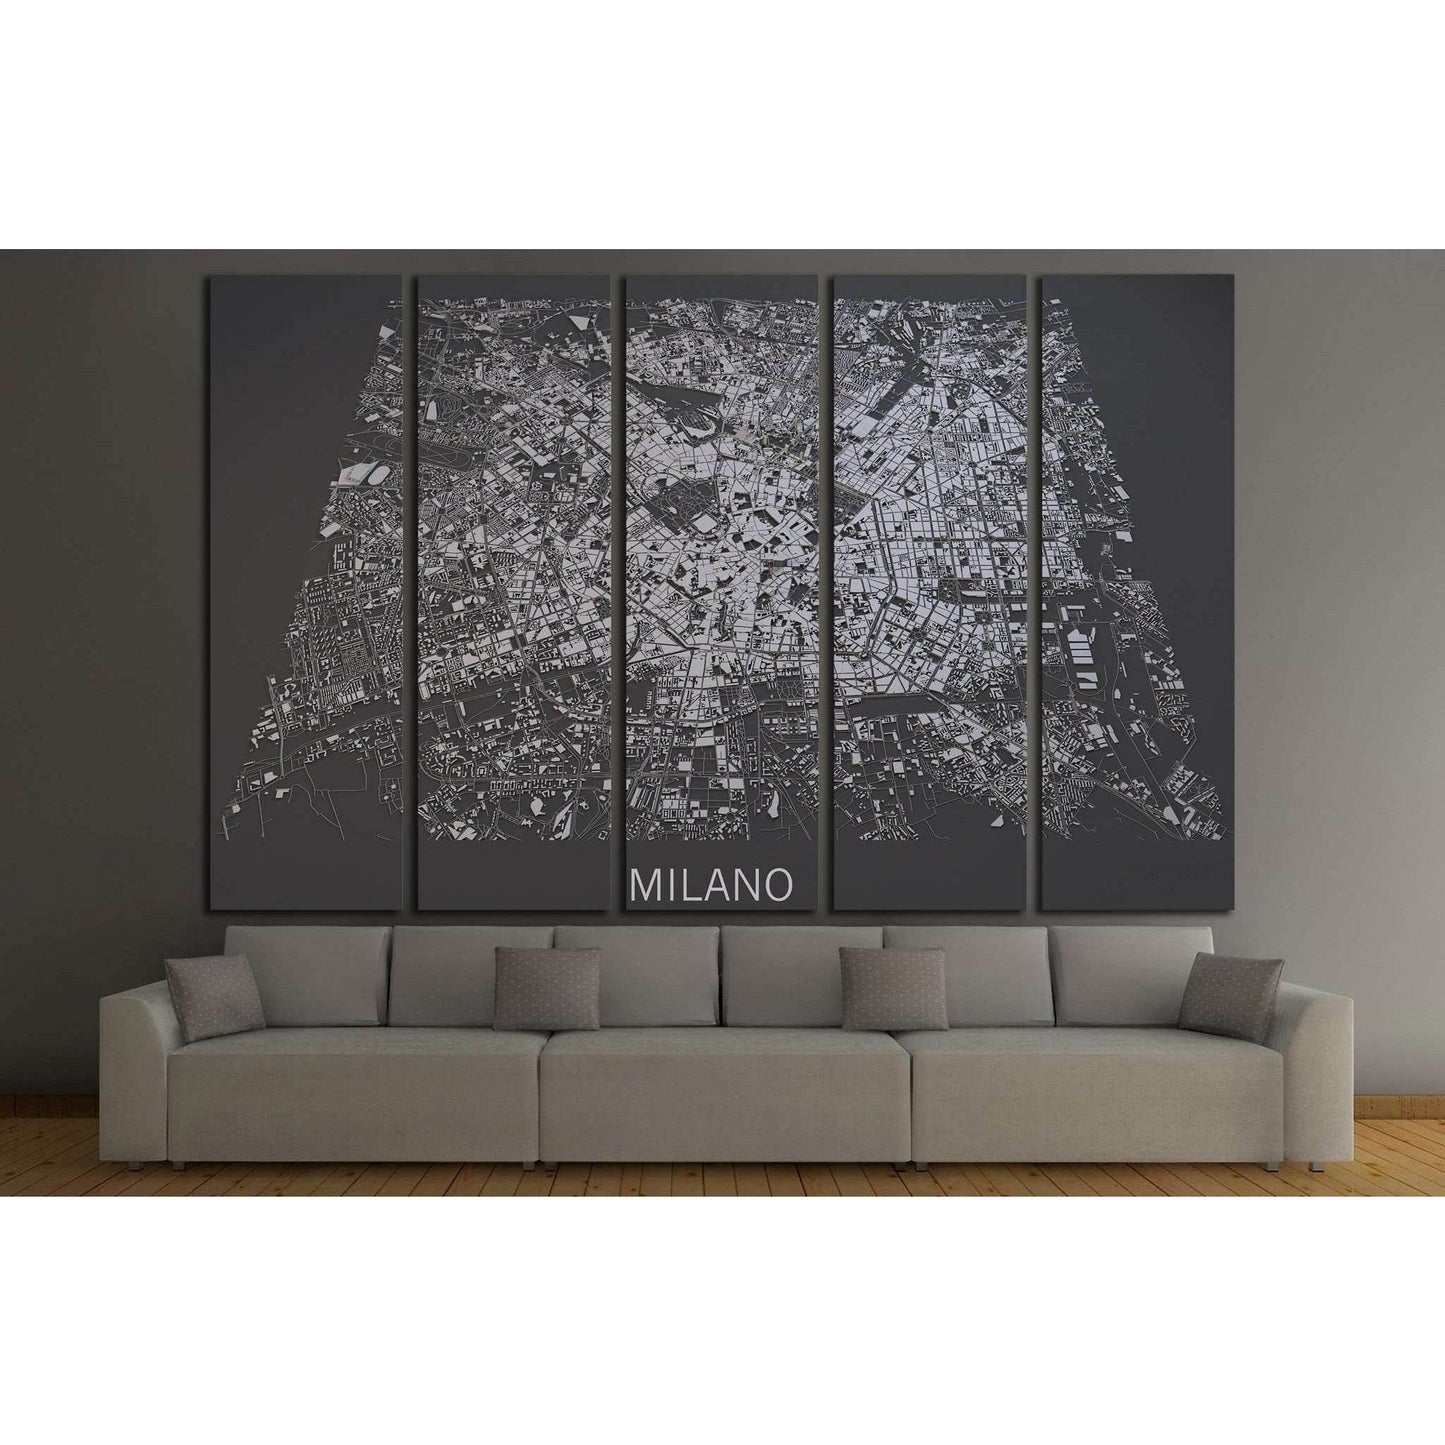 Map Of Milan Canvas PrintDecorate your walls with a stunning Milan Map Canvas Art Print from the world's largest art gallery. Choose from thousands of Decorative Map artworks with various sizing options. Choose your perfect art print to complete your home